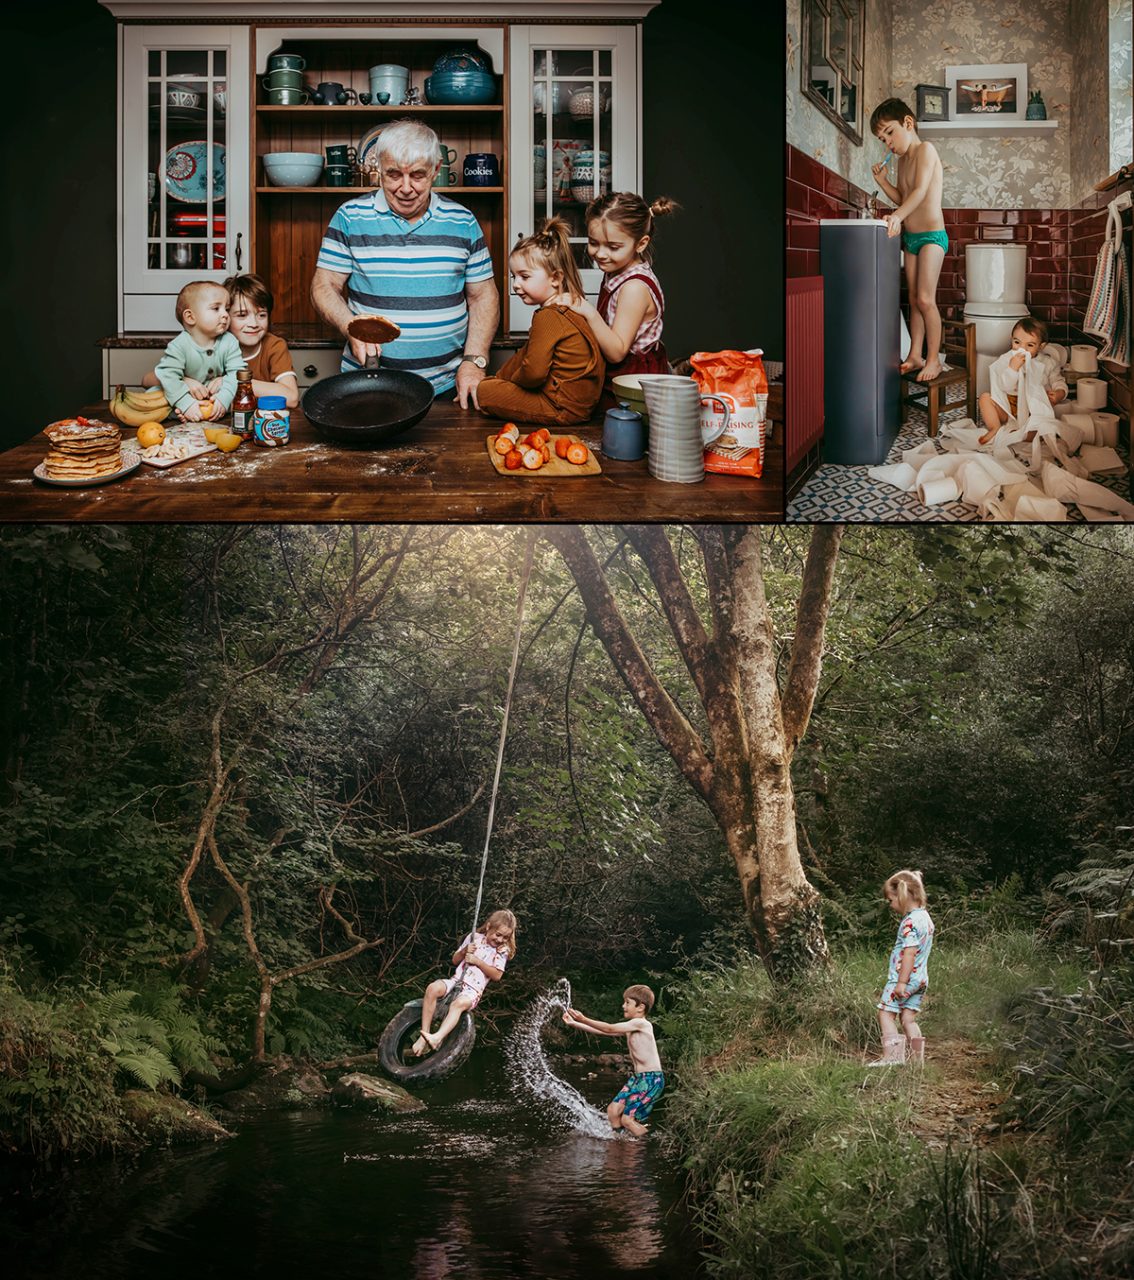 Children and Family Photos by Rashida Keenan, Runner Up for Open Creative Photographer of the Year 2022